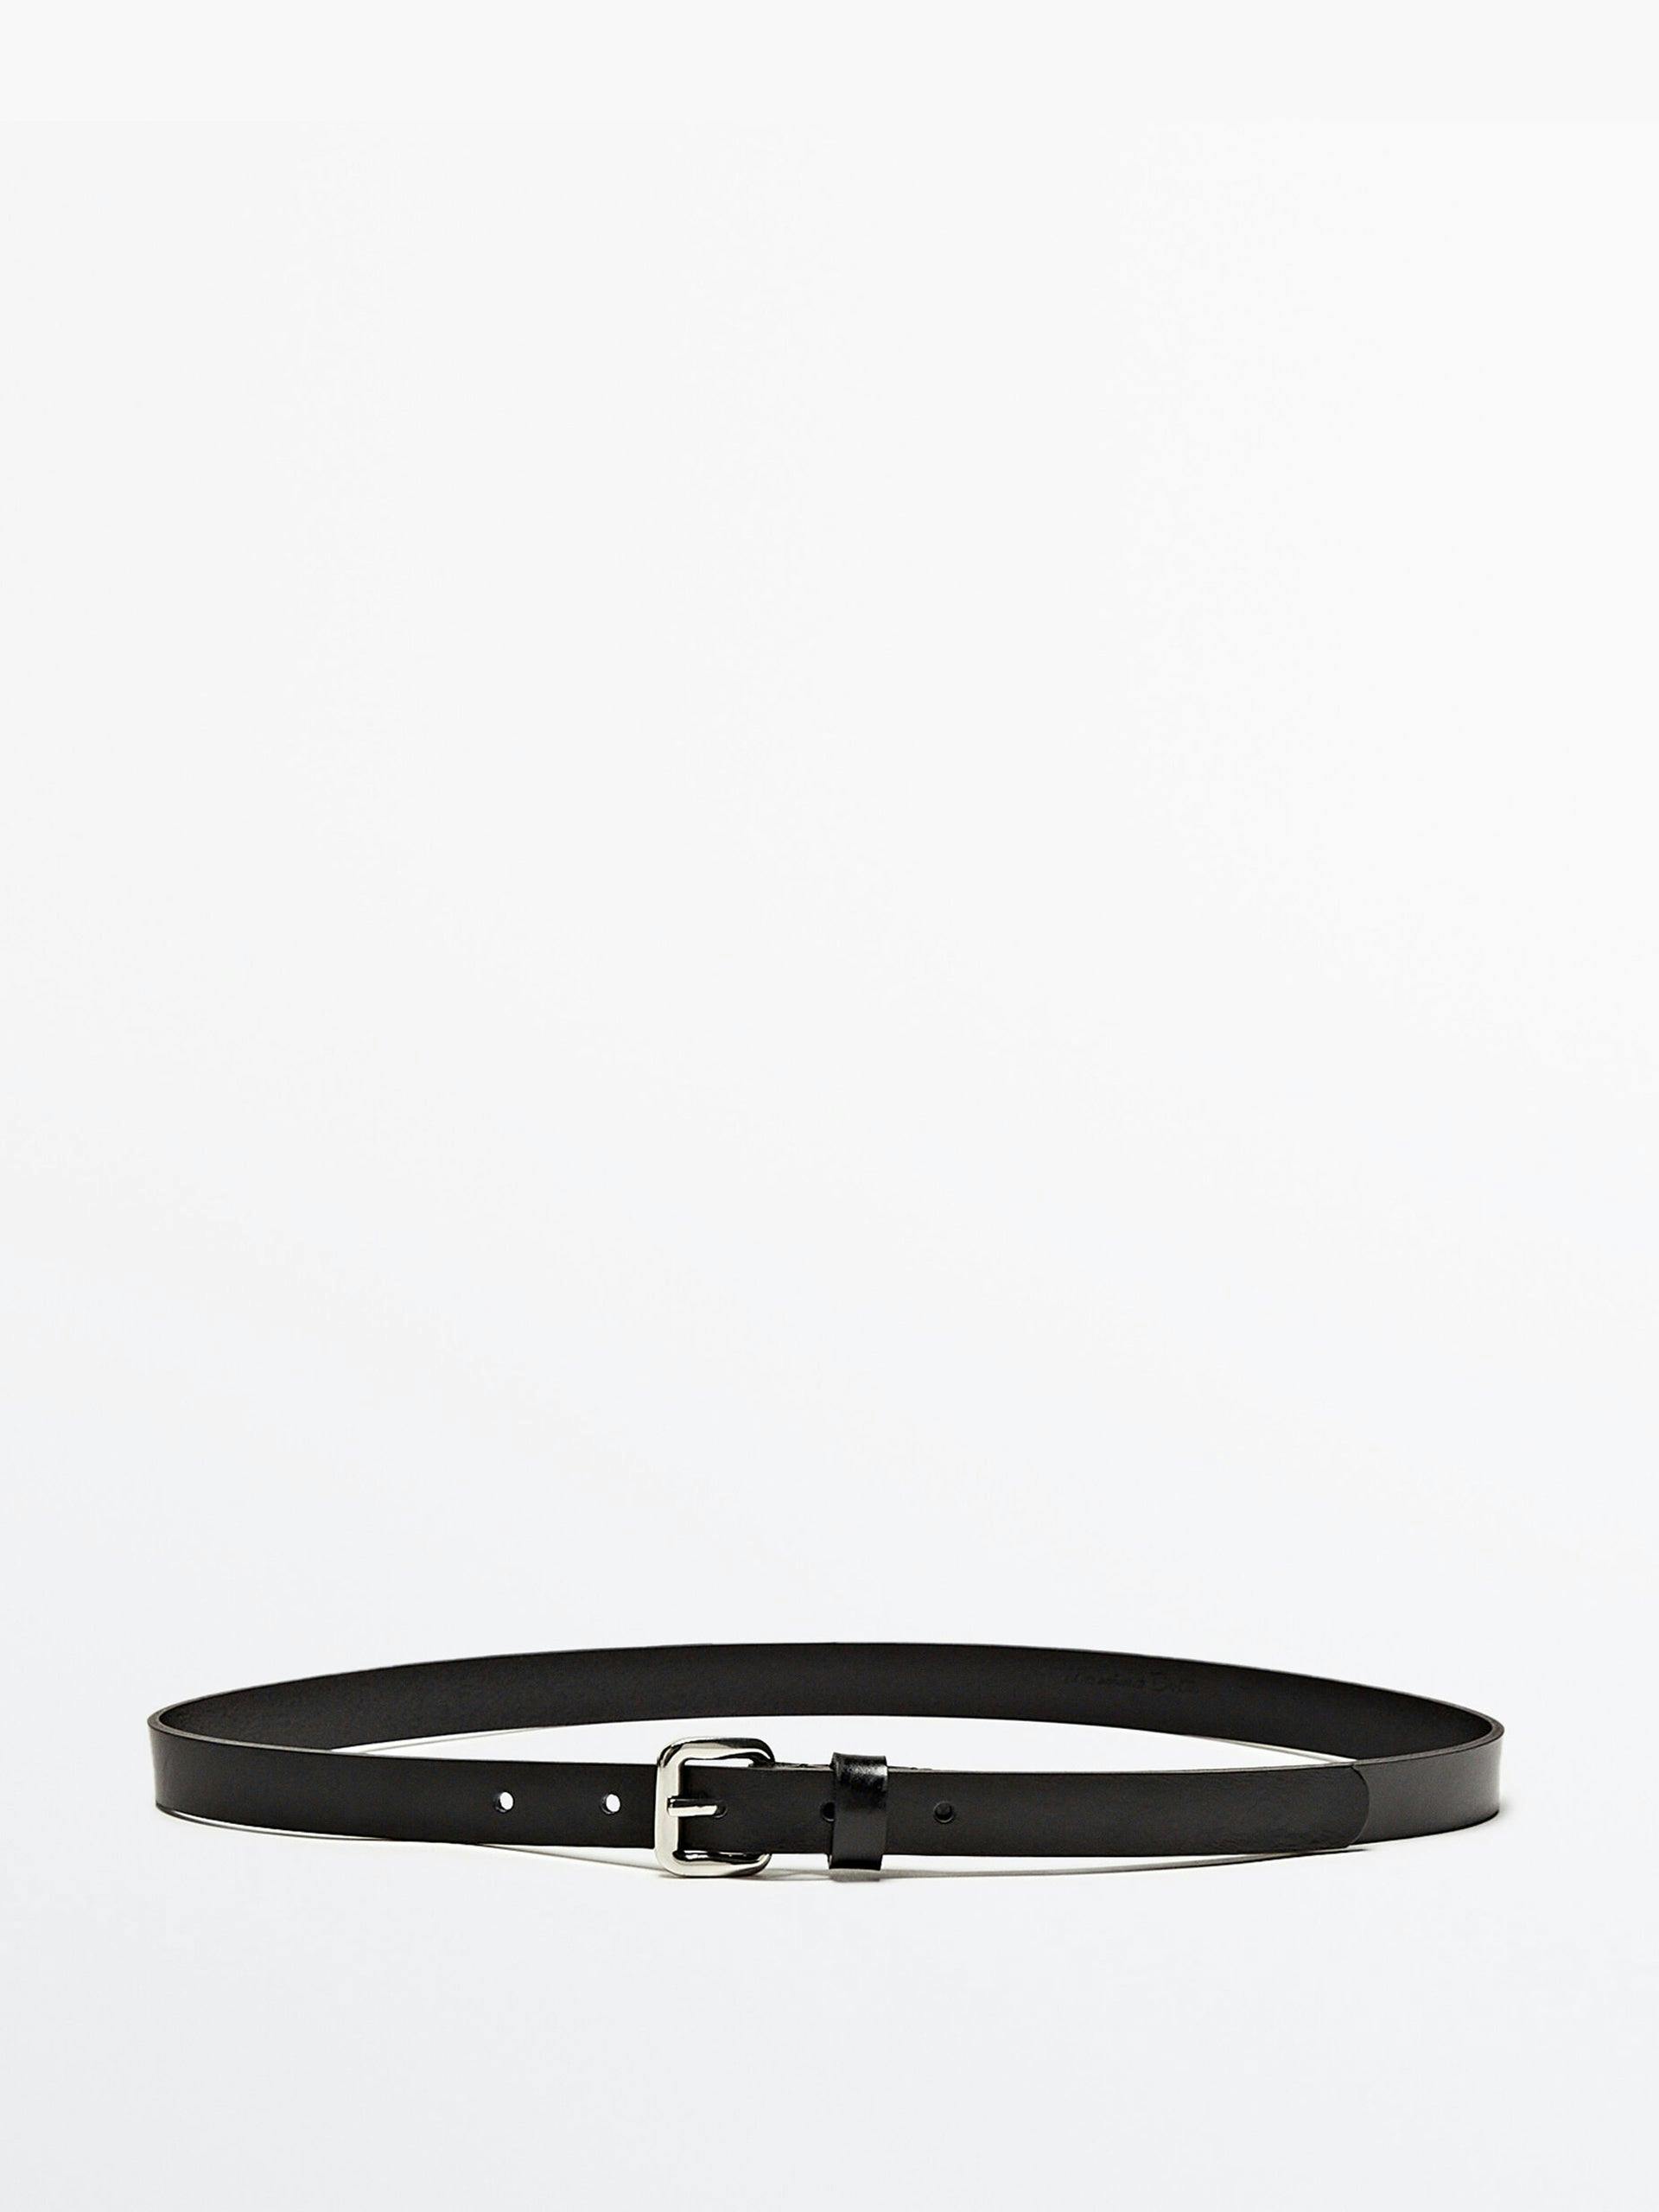 Black leather belt with rectangular buckle